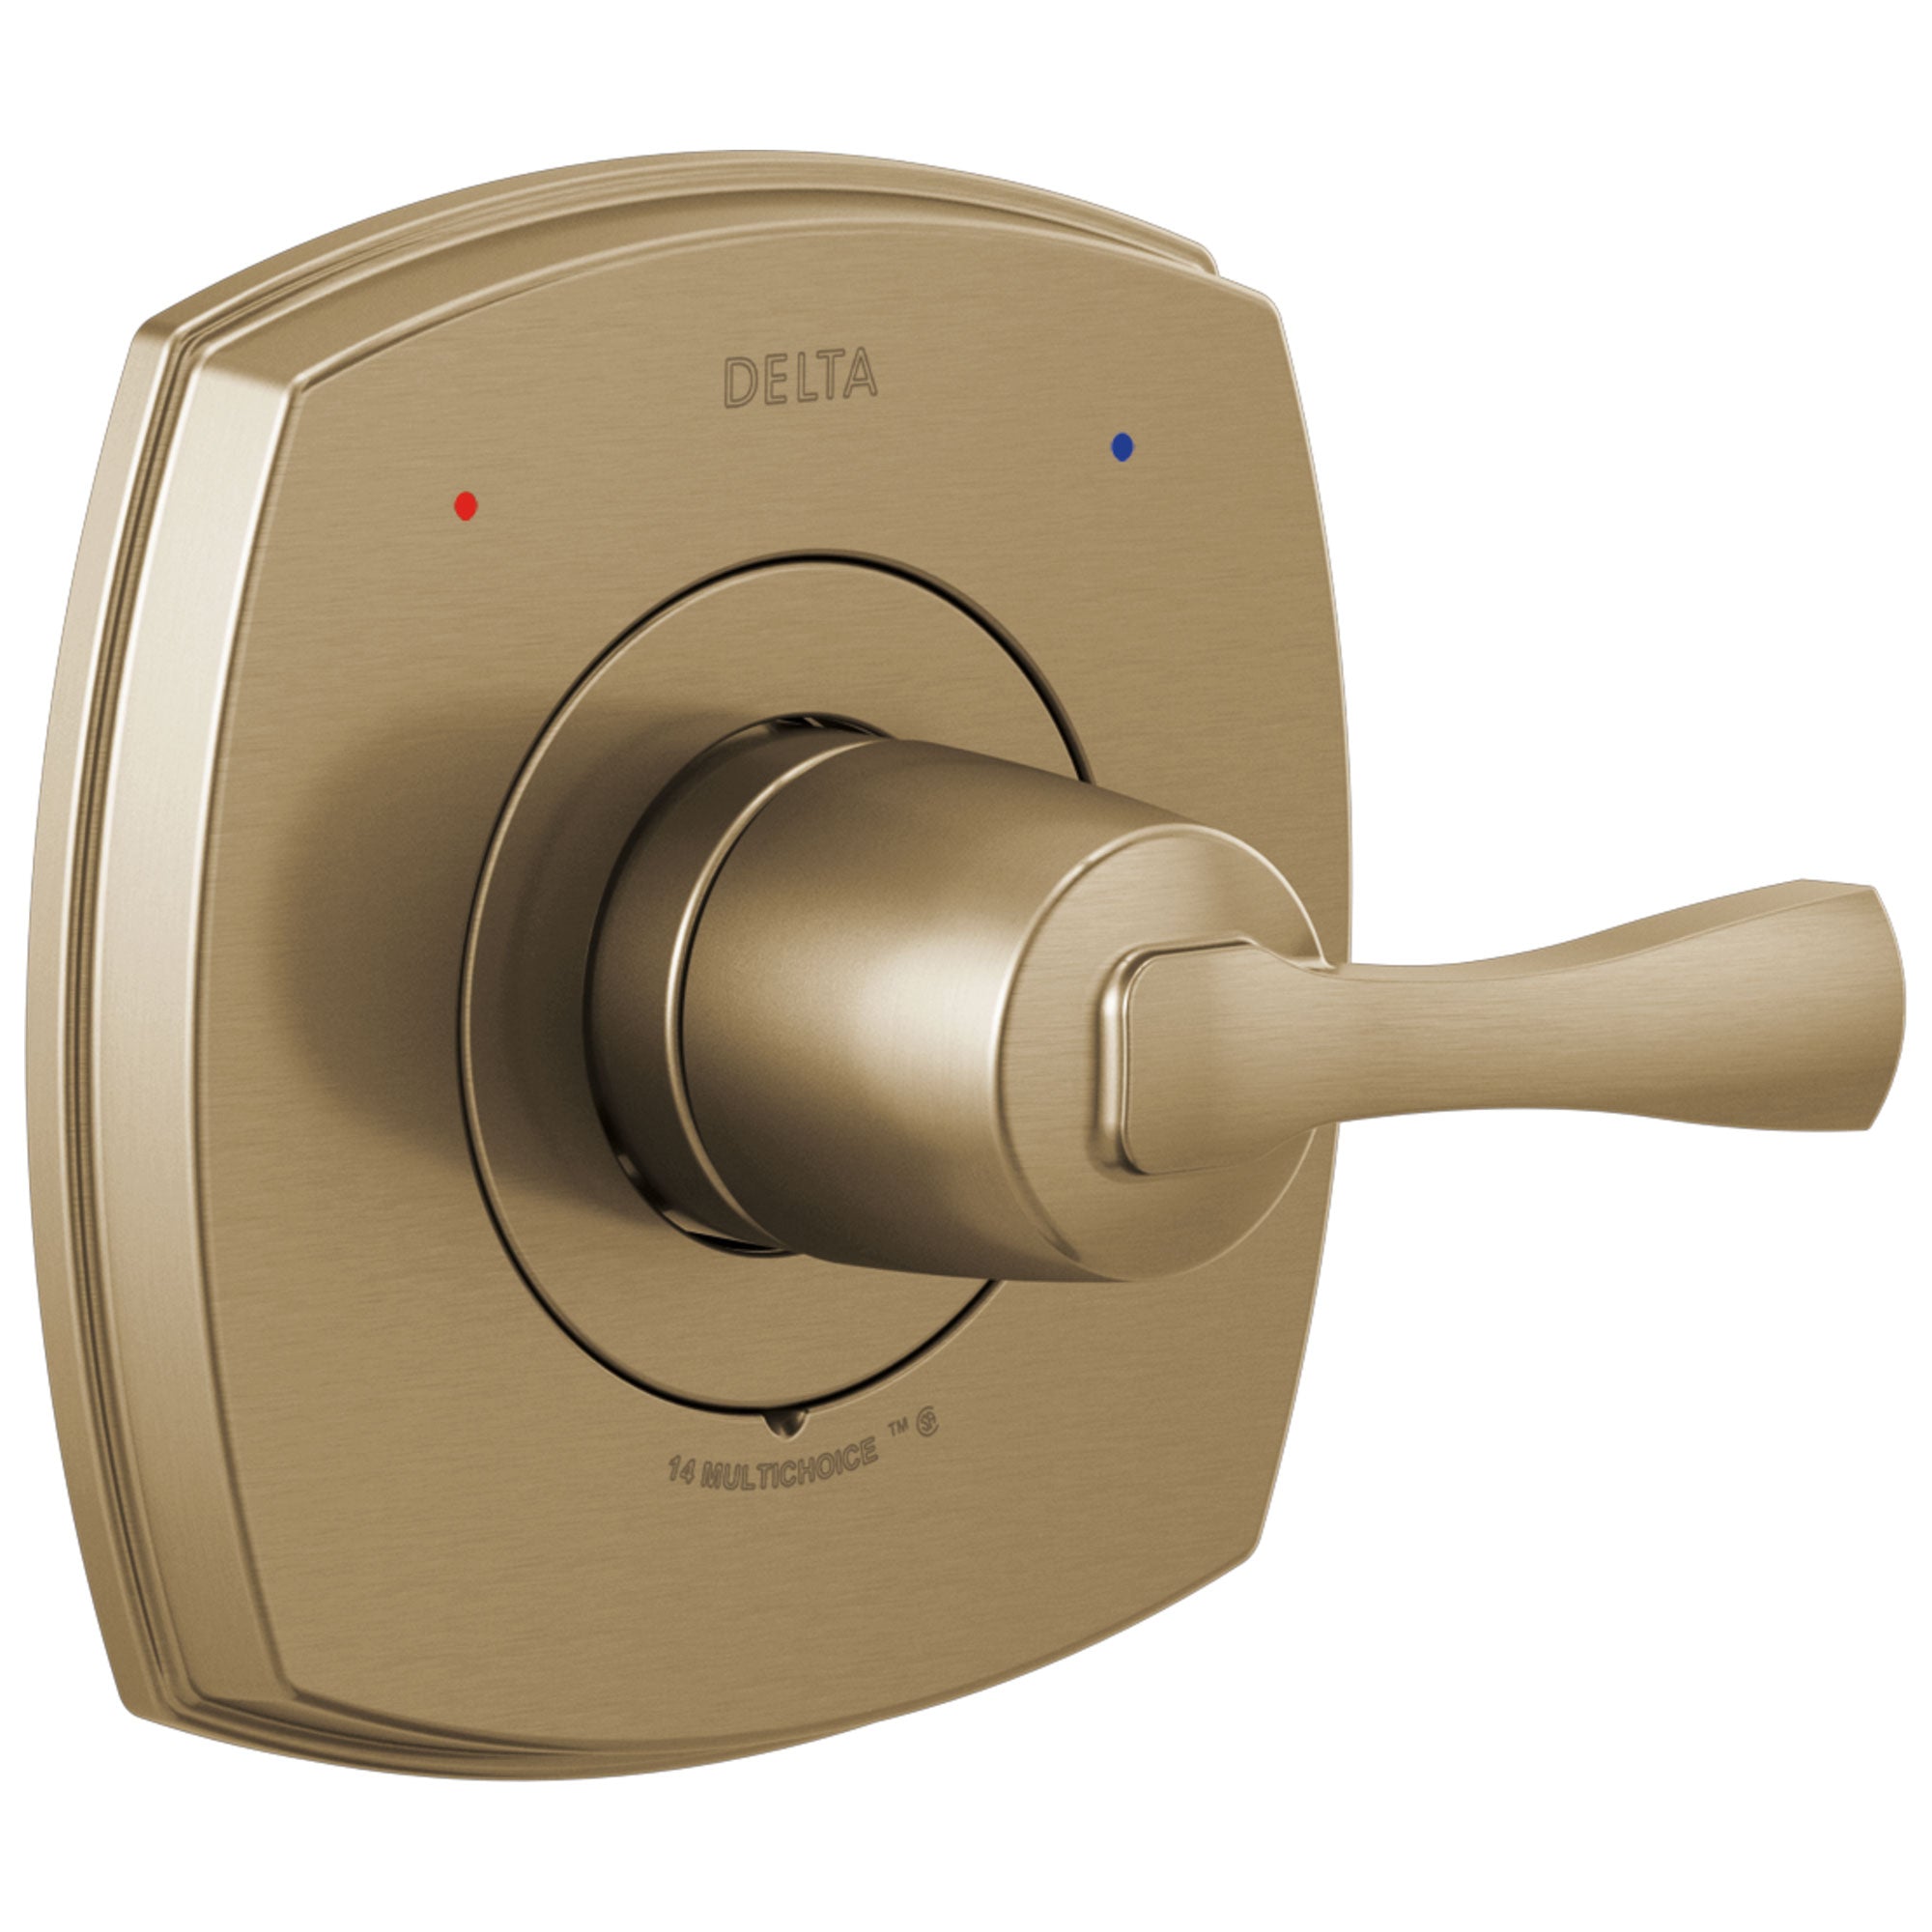 Delta Stryke Champagne Bronze Finish 14 Series Single Lever Handle Shower Faucet Control Only Includes Cartridge and Valve without Stops D3535V